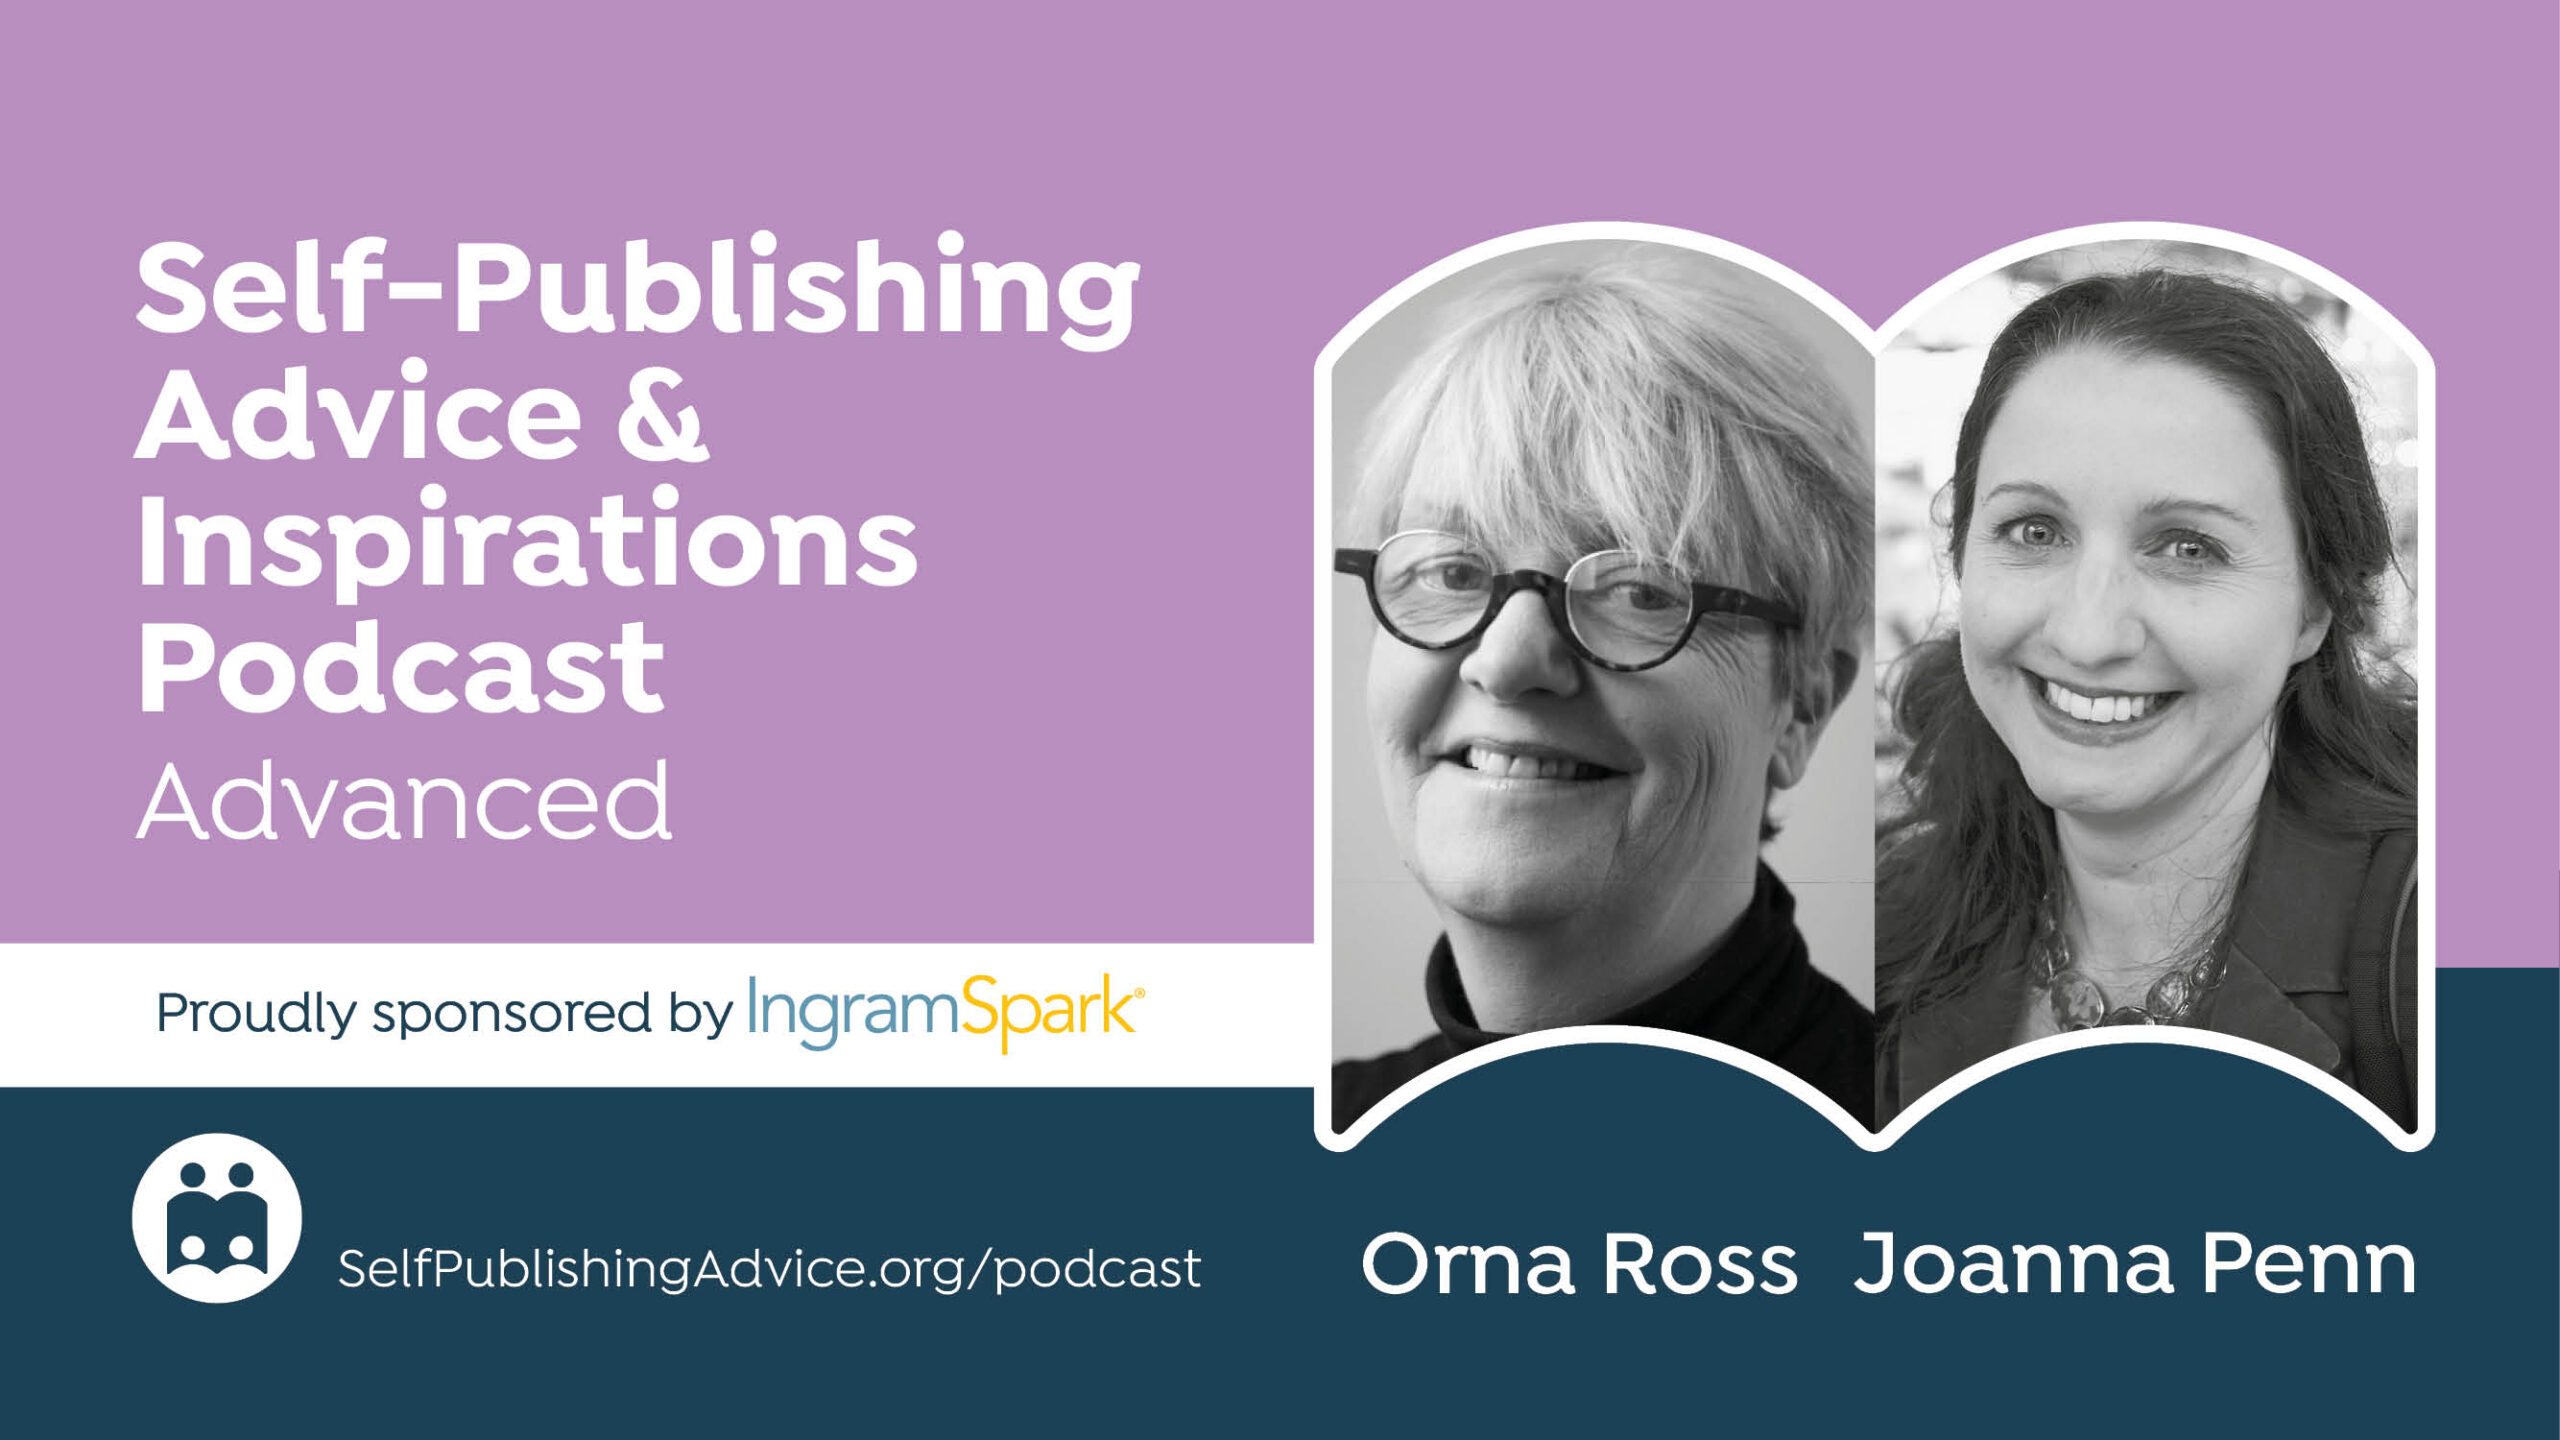 PODCAST: Crowdfunding For Authors